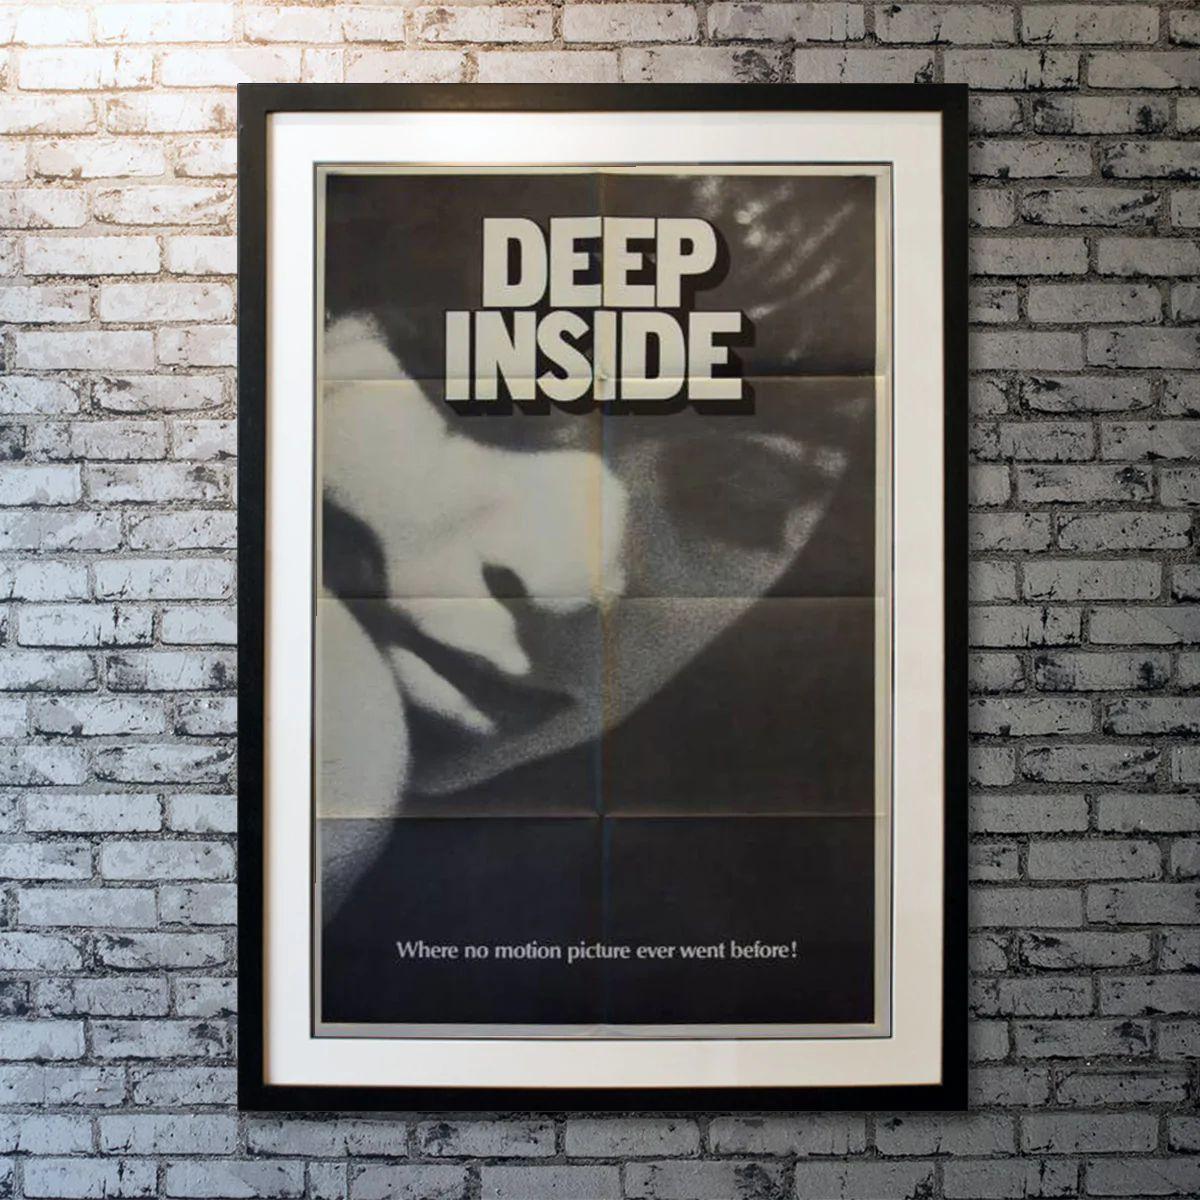 Deep Inside, Unframed Poster, 1968

Original One Sheet (27 X 41 Inches). Original X-rated One Sheet.

Year: 1968
Nationality: United States
Condition: Folded
Type: Original One Sheet
Size: 27 X 41 Inches

Unframed Poster with Linen Backing: